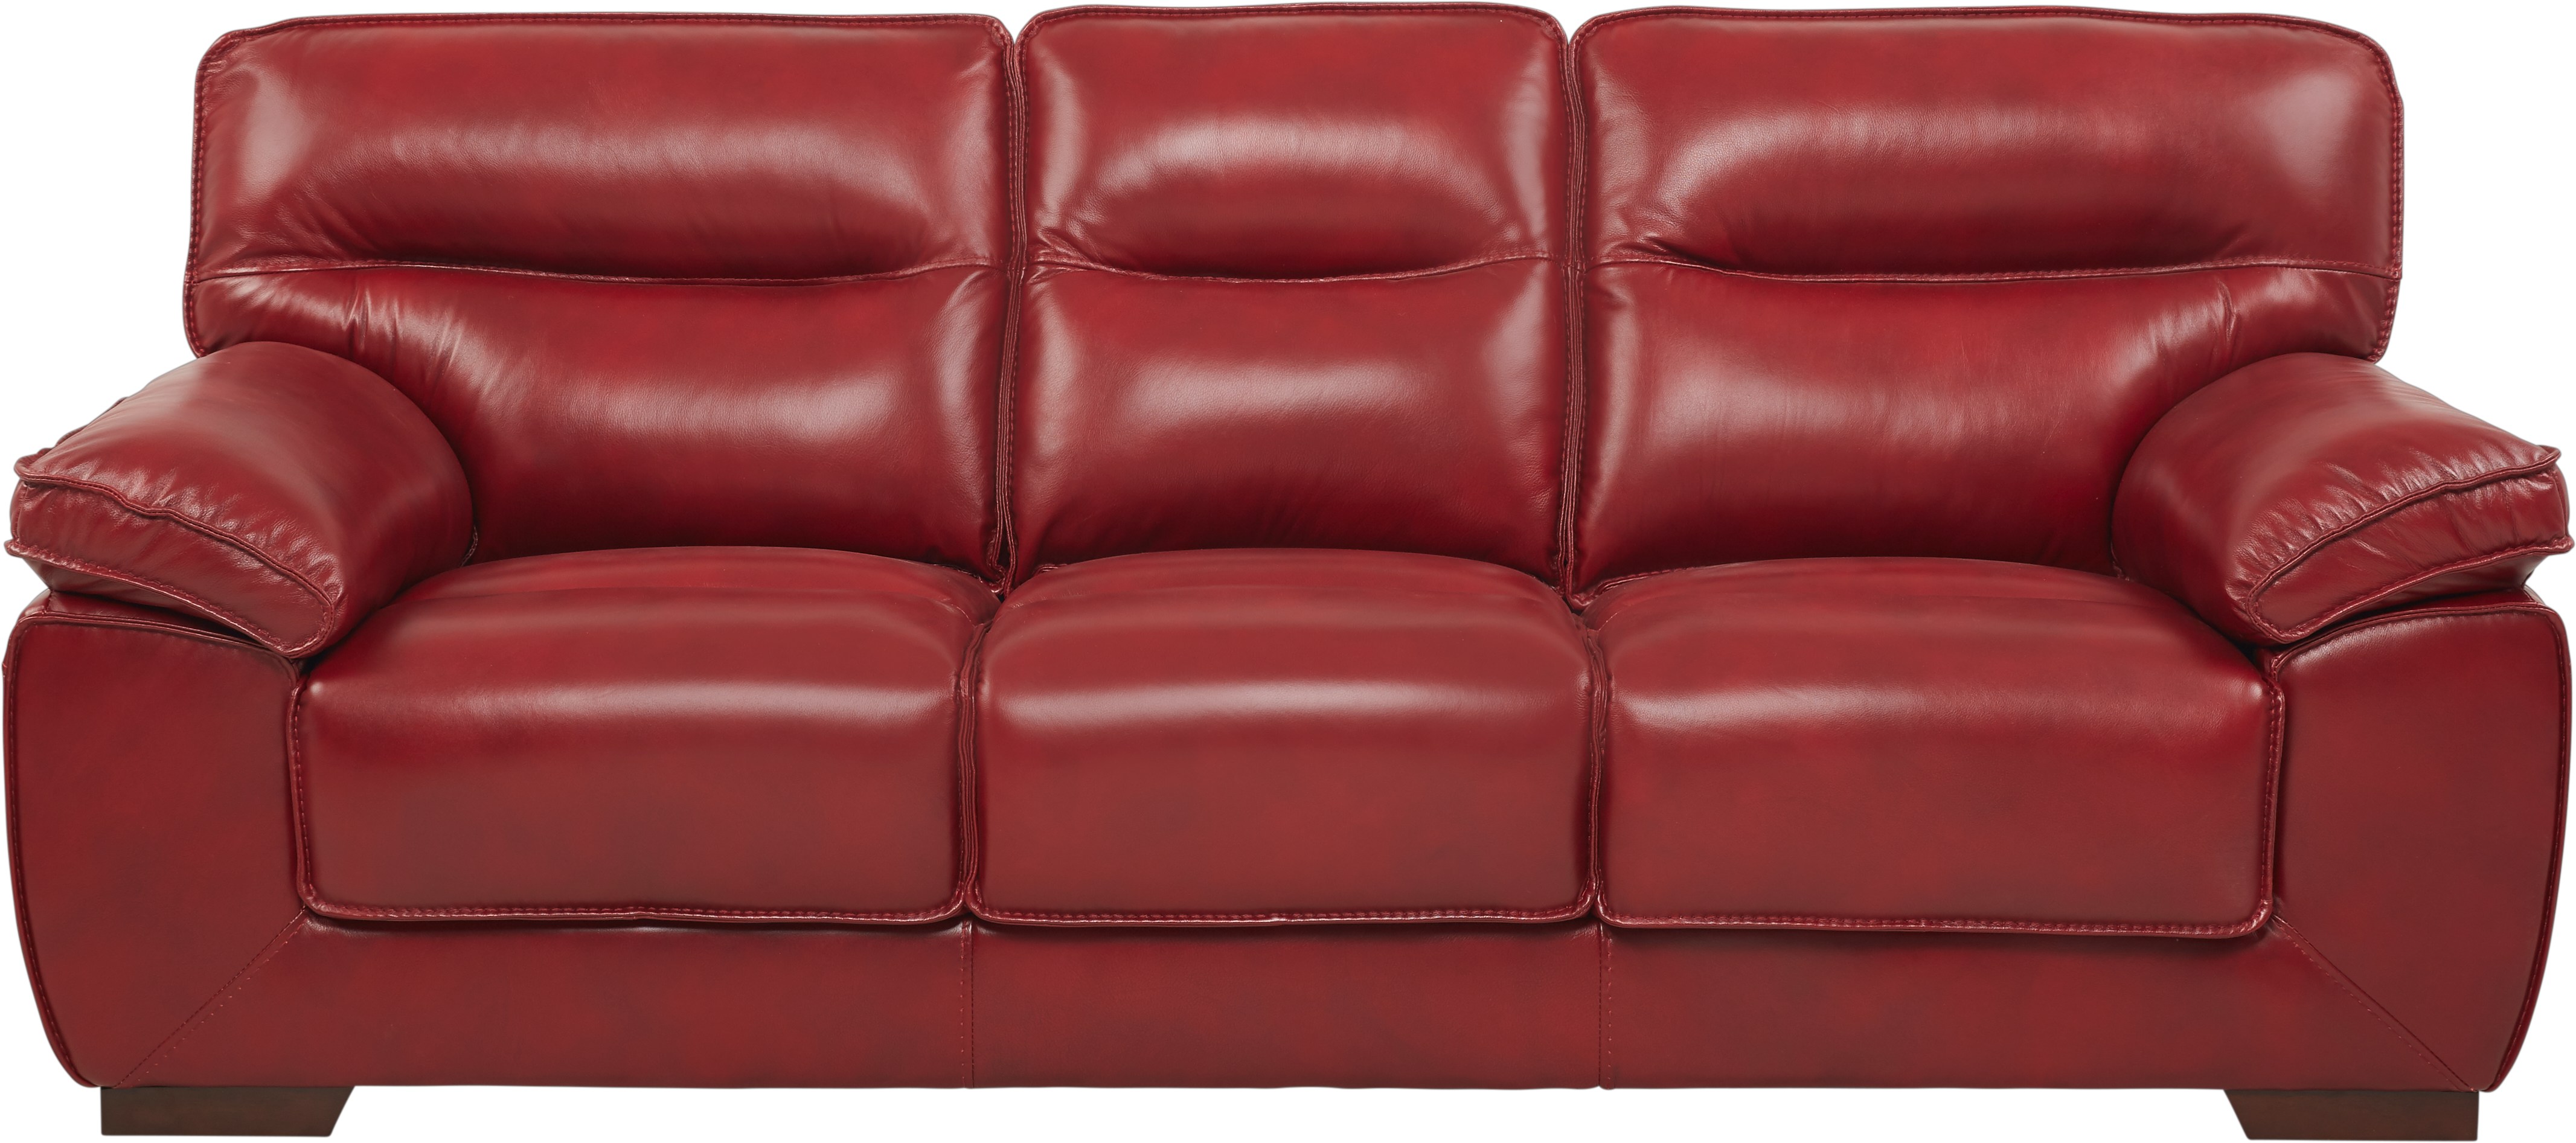 red leather sofa grey walls